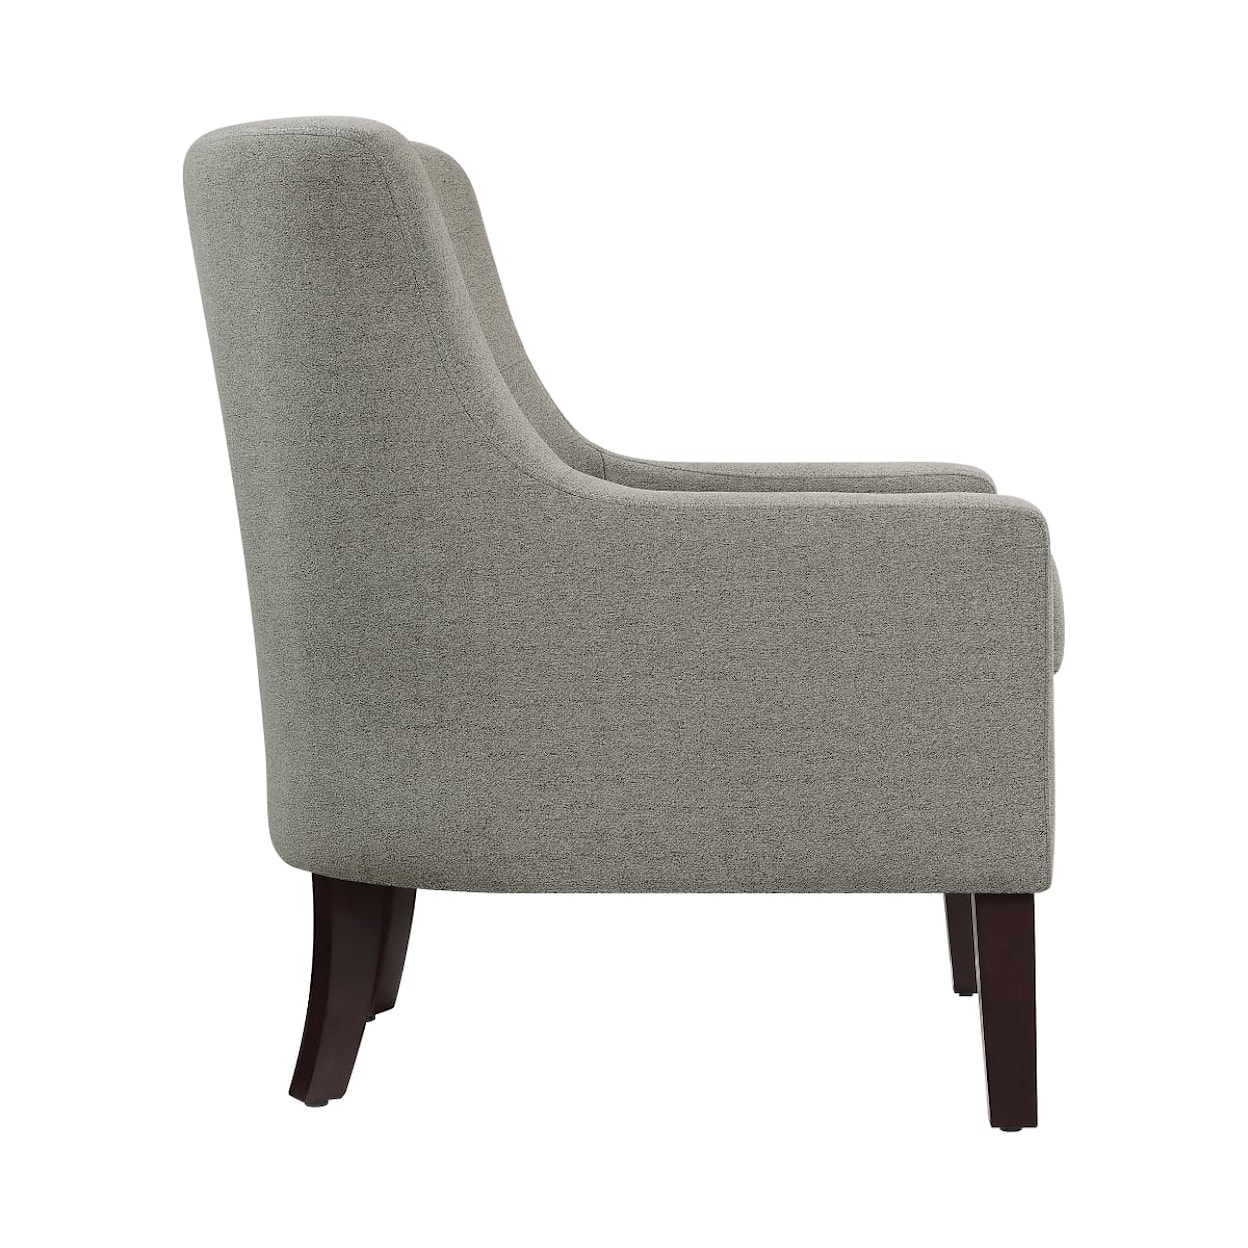 Homelegance Cairn Accent Chair